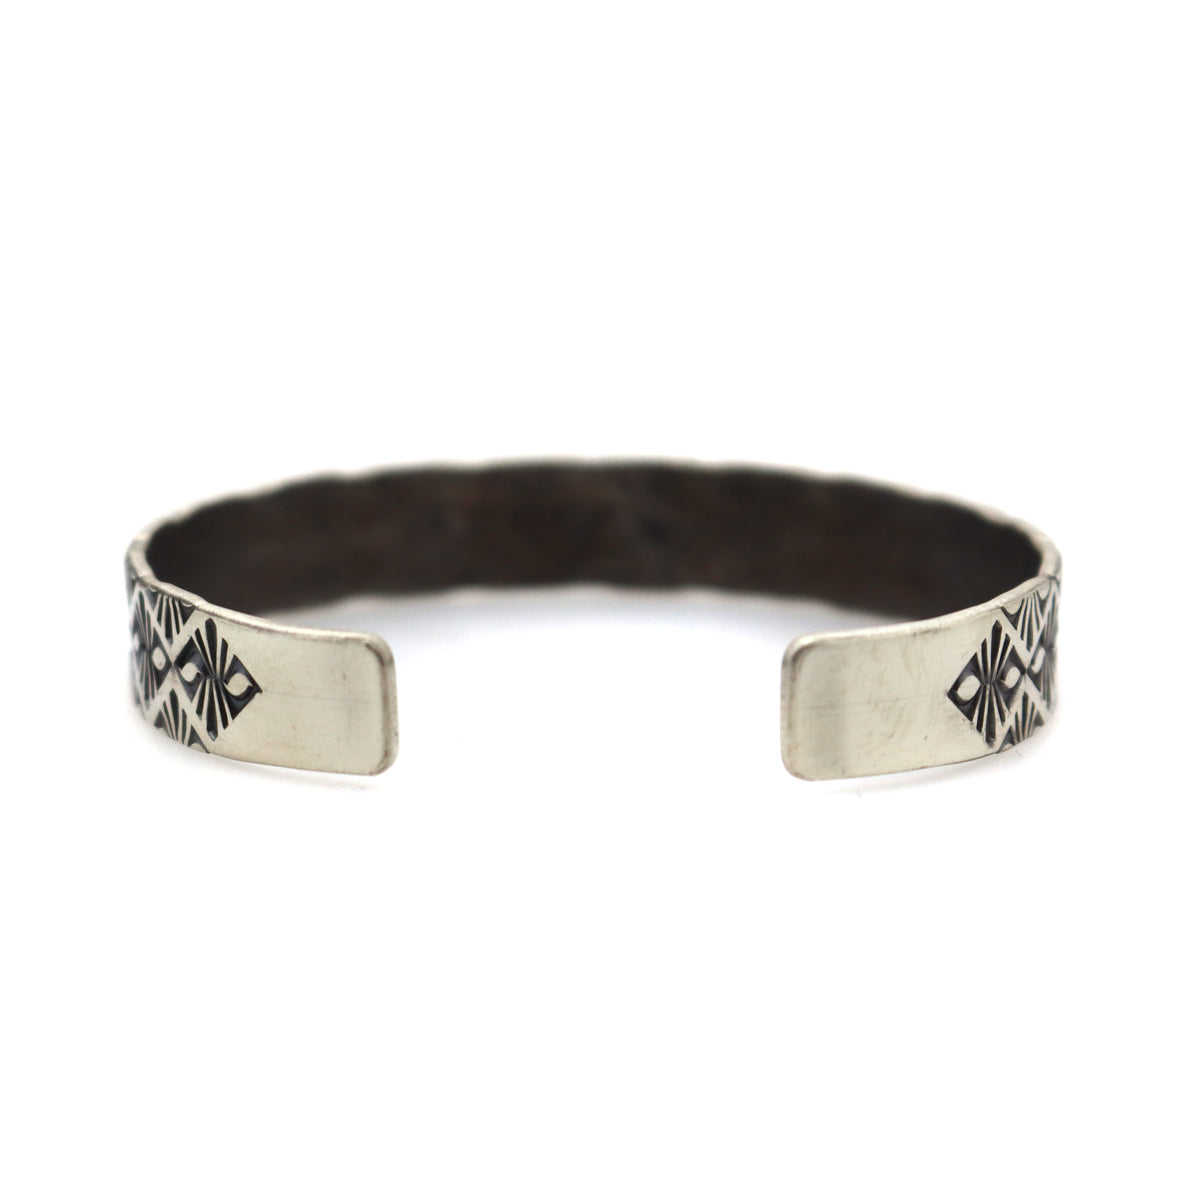 Roland Begay - Navajo Contemporary Sterling Silver Bracelet with Stamped Design, size 6.75 (J13547) 2
